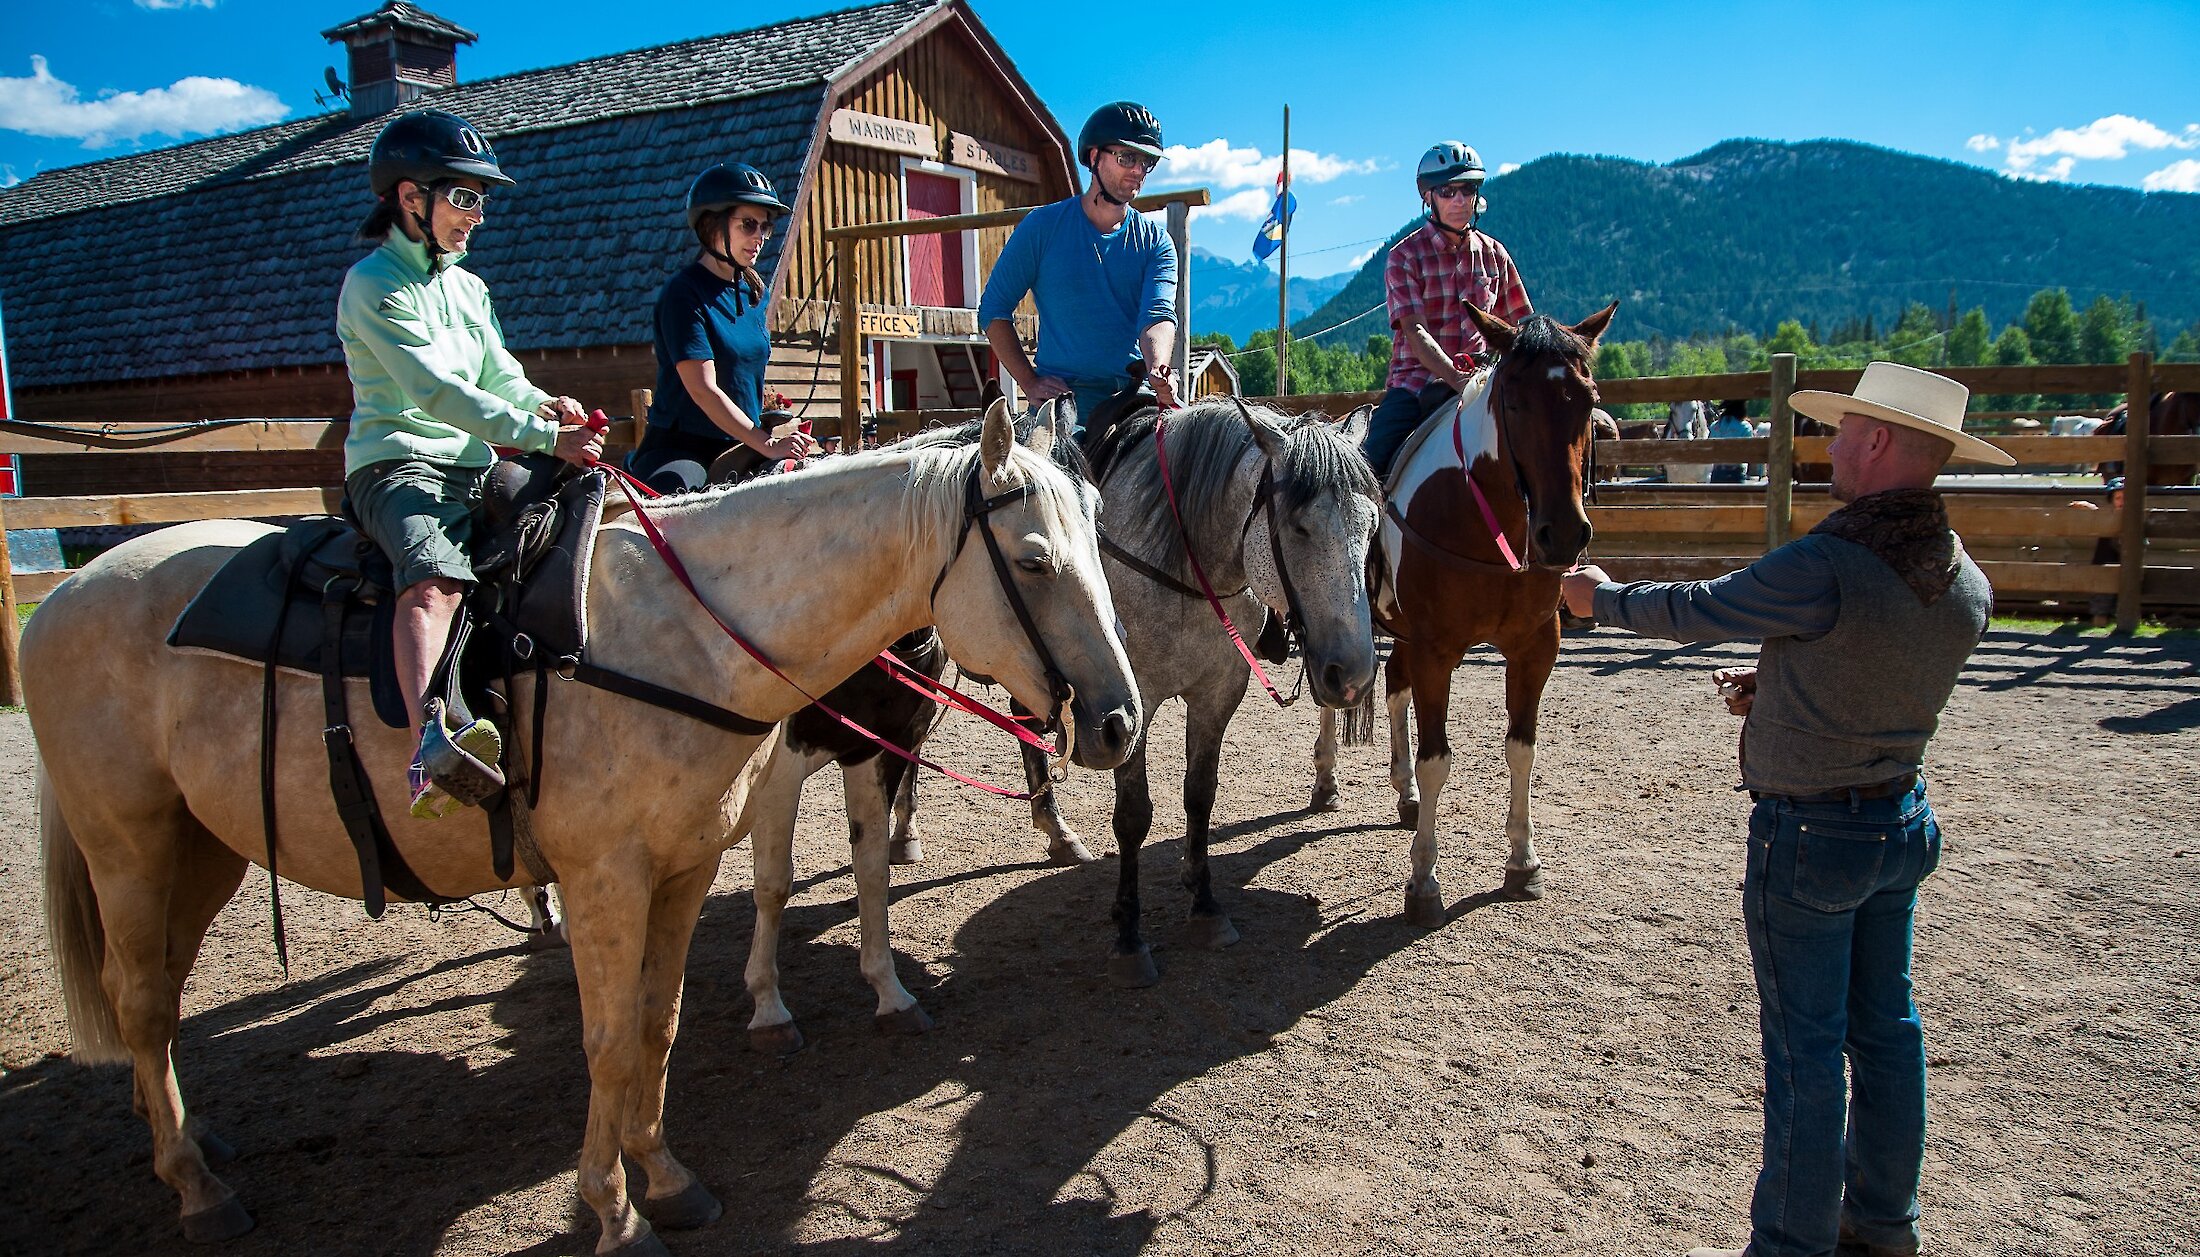 Getting instruction before heading out on a trail ride in Banff